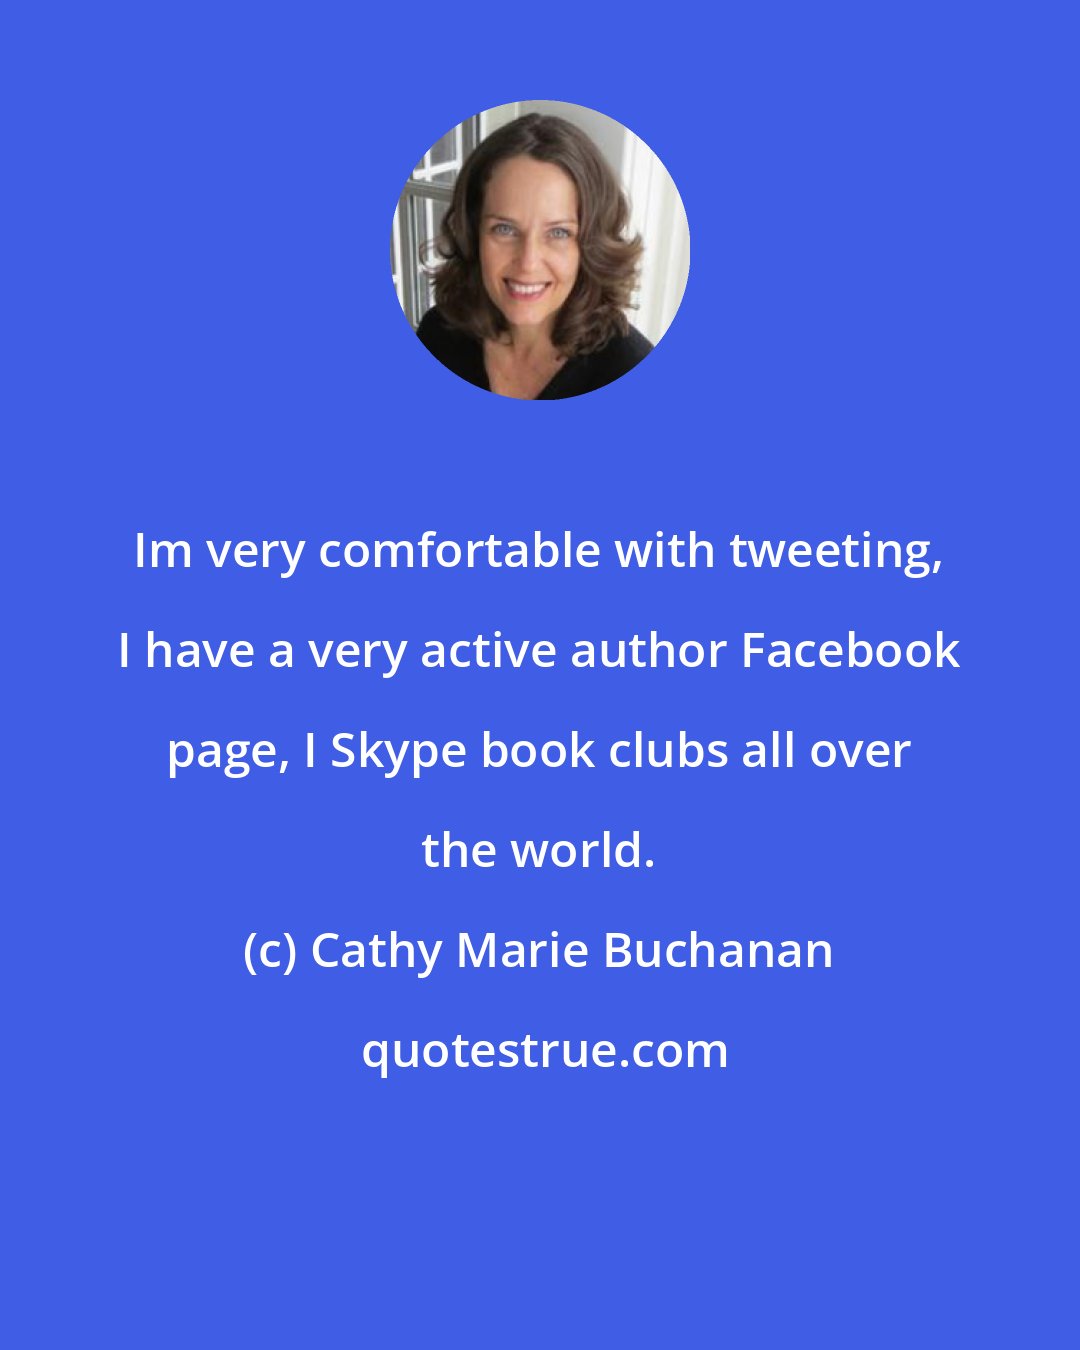 Cathy Marie Buchanan: Im very comfortable with tweeting, I have a very active author Facebook page, I Skype book clubs all over the world.